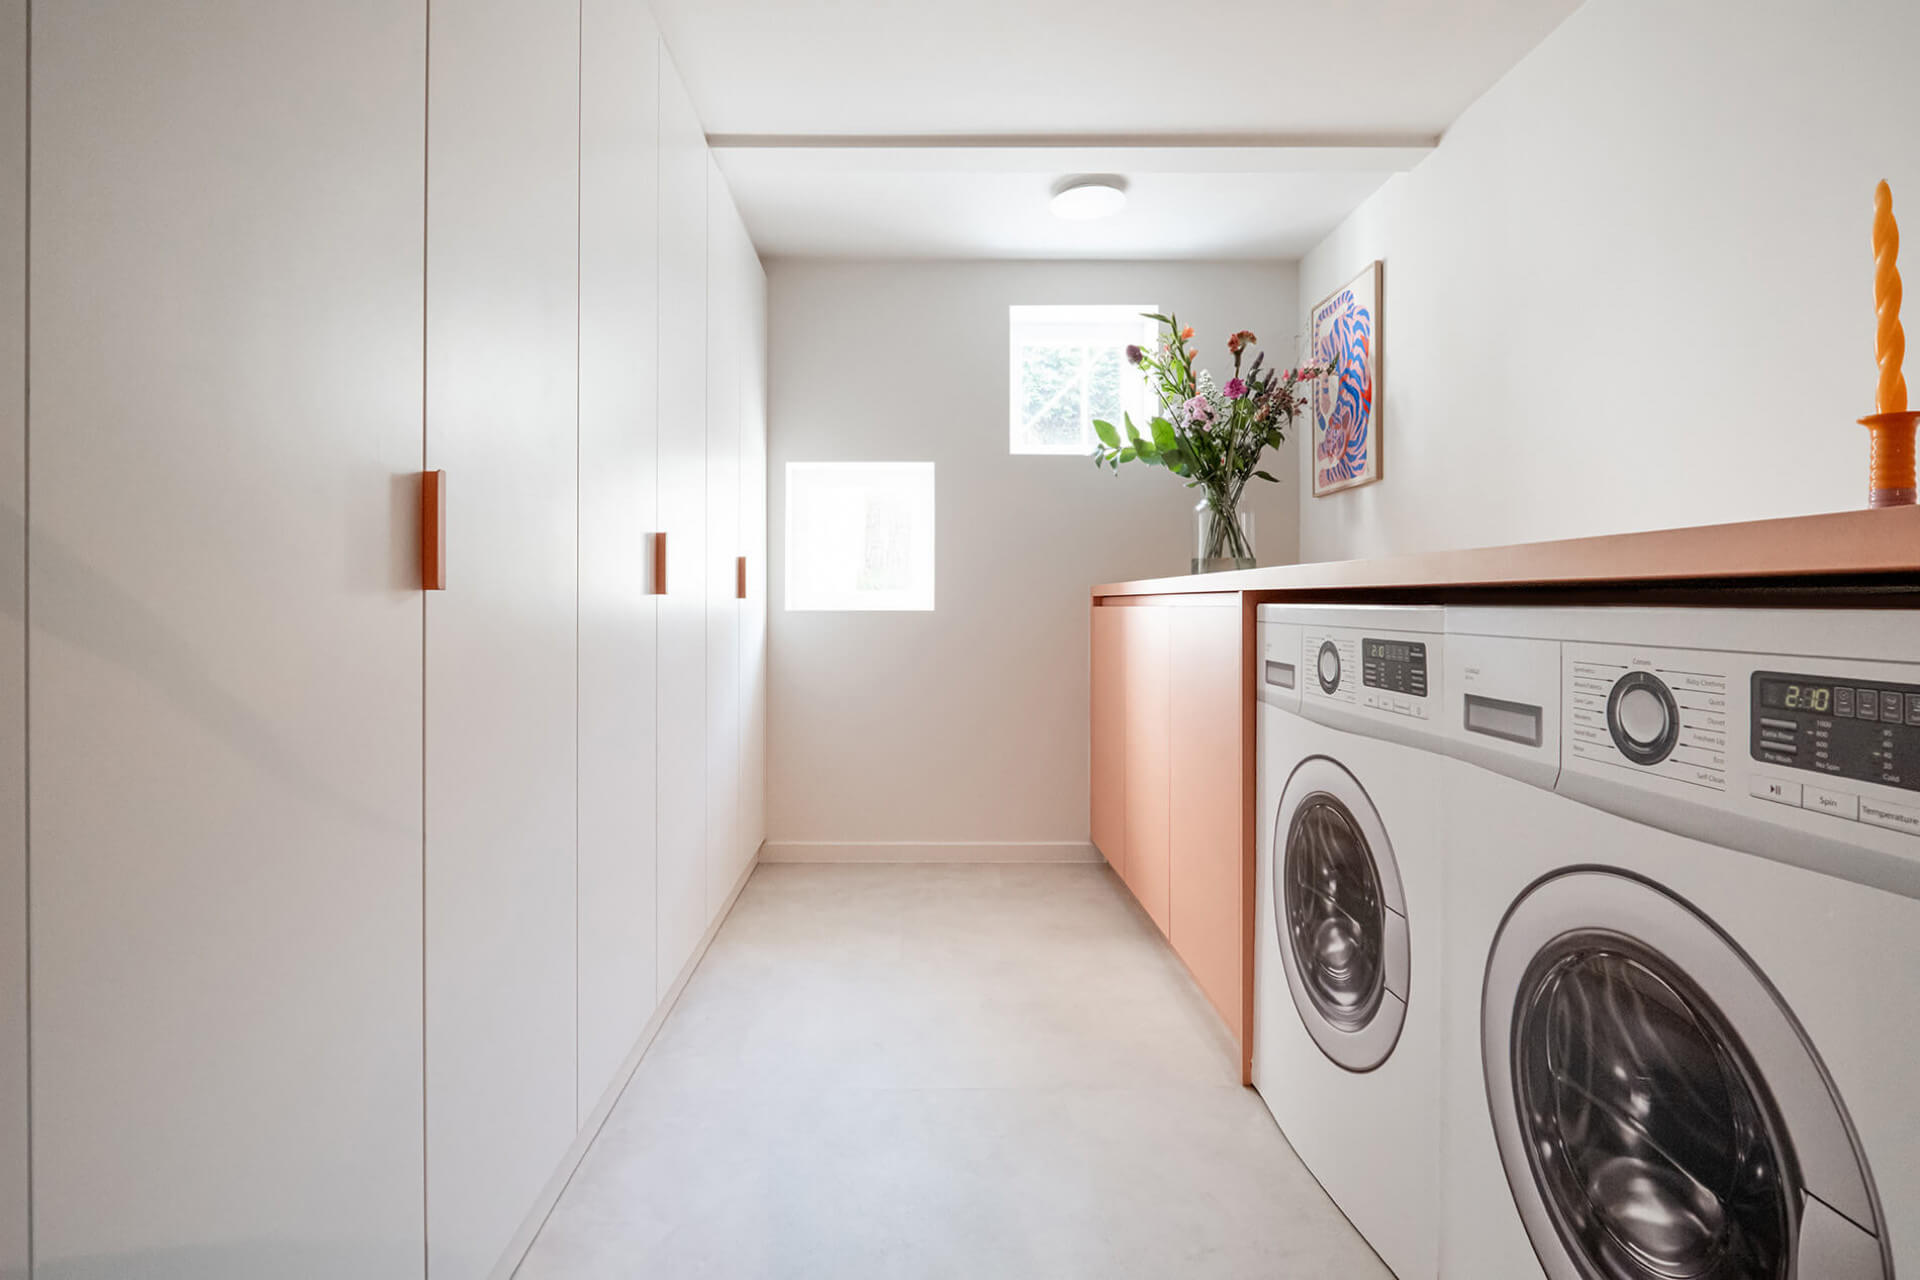 Tailor-made enclosure for laundry room